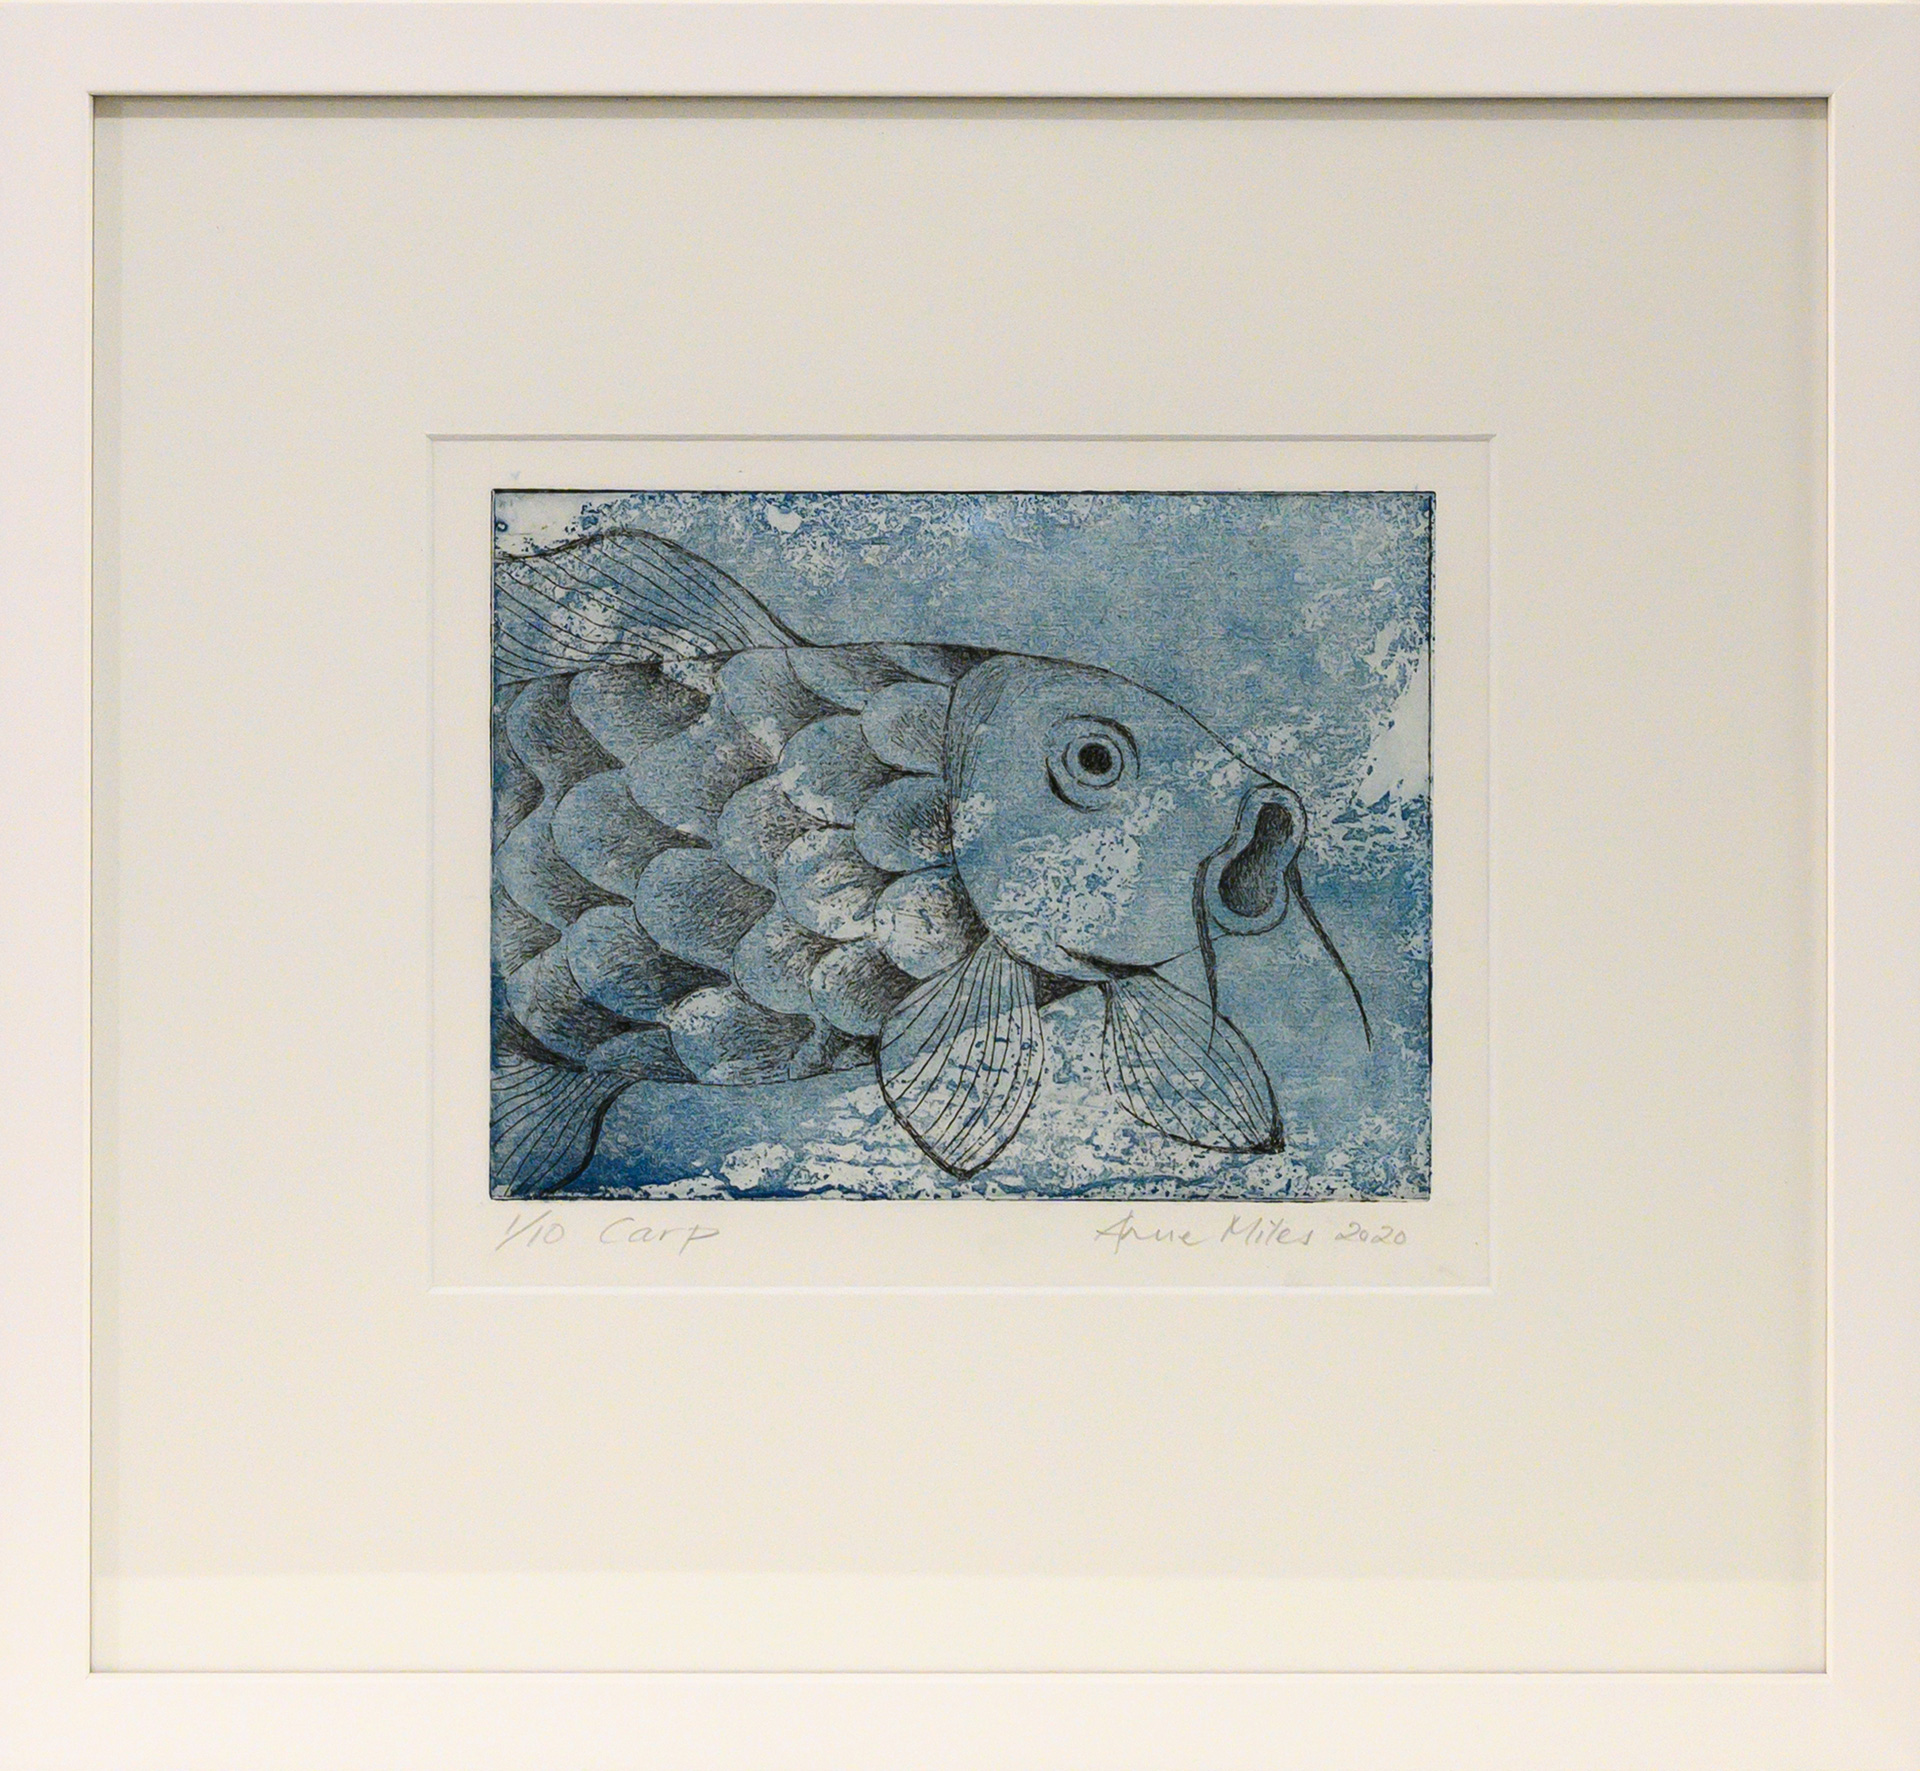 Framed artwork of a black & white Carp over a blue background by Anne Miles